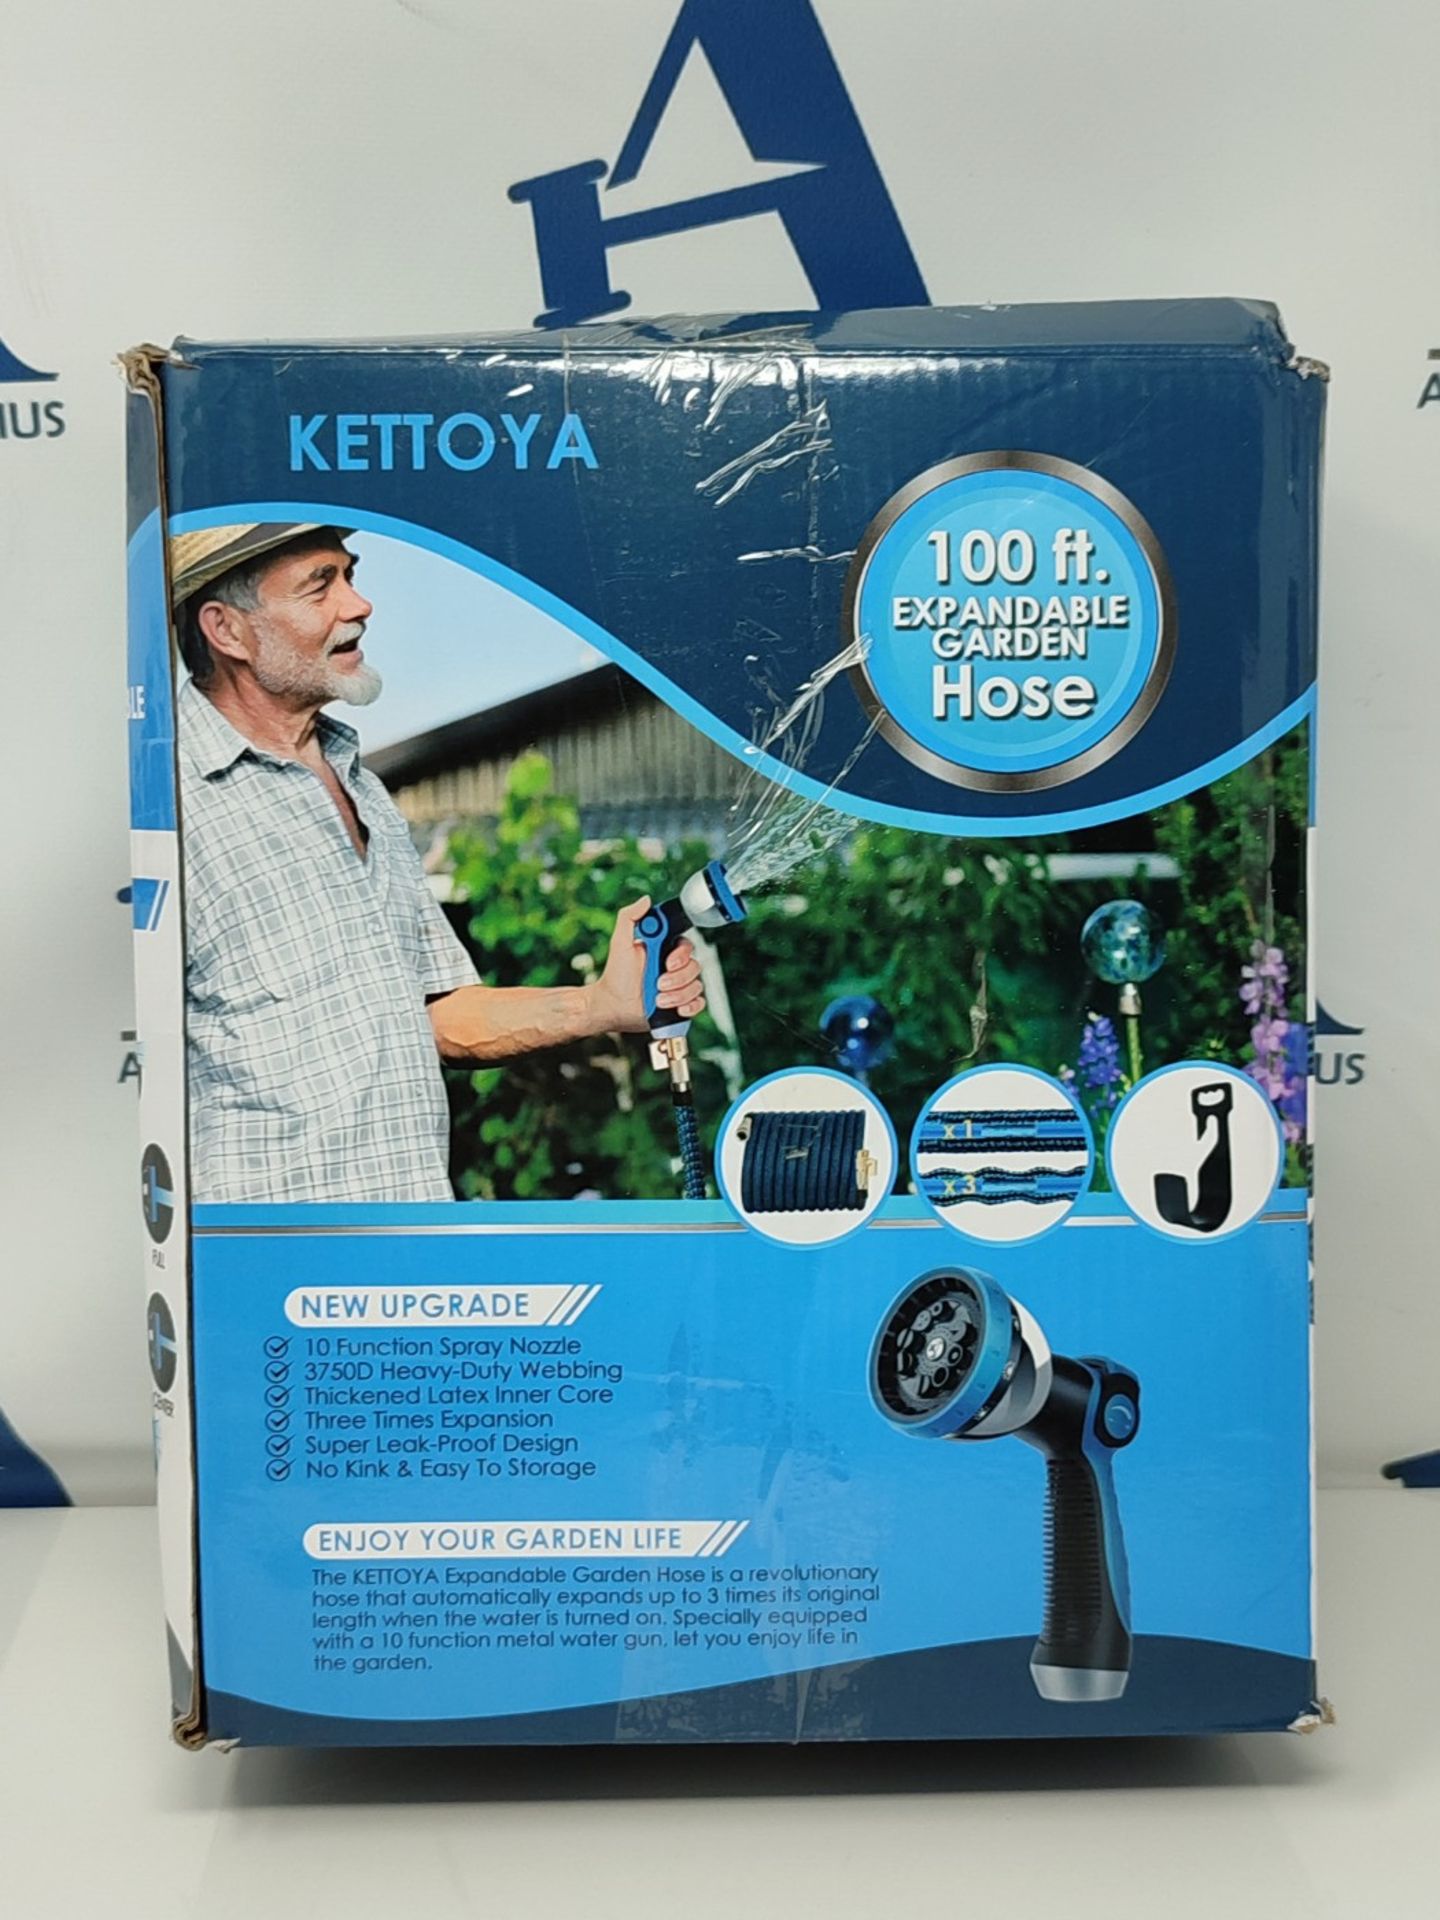 KETTOYA 100FT Expandable Garden Hose, Flexible Water Hose with 10-Pattern Spray Nozzle - Image 7 of 10